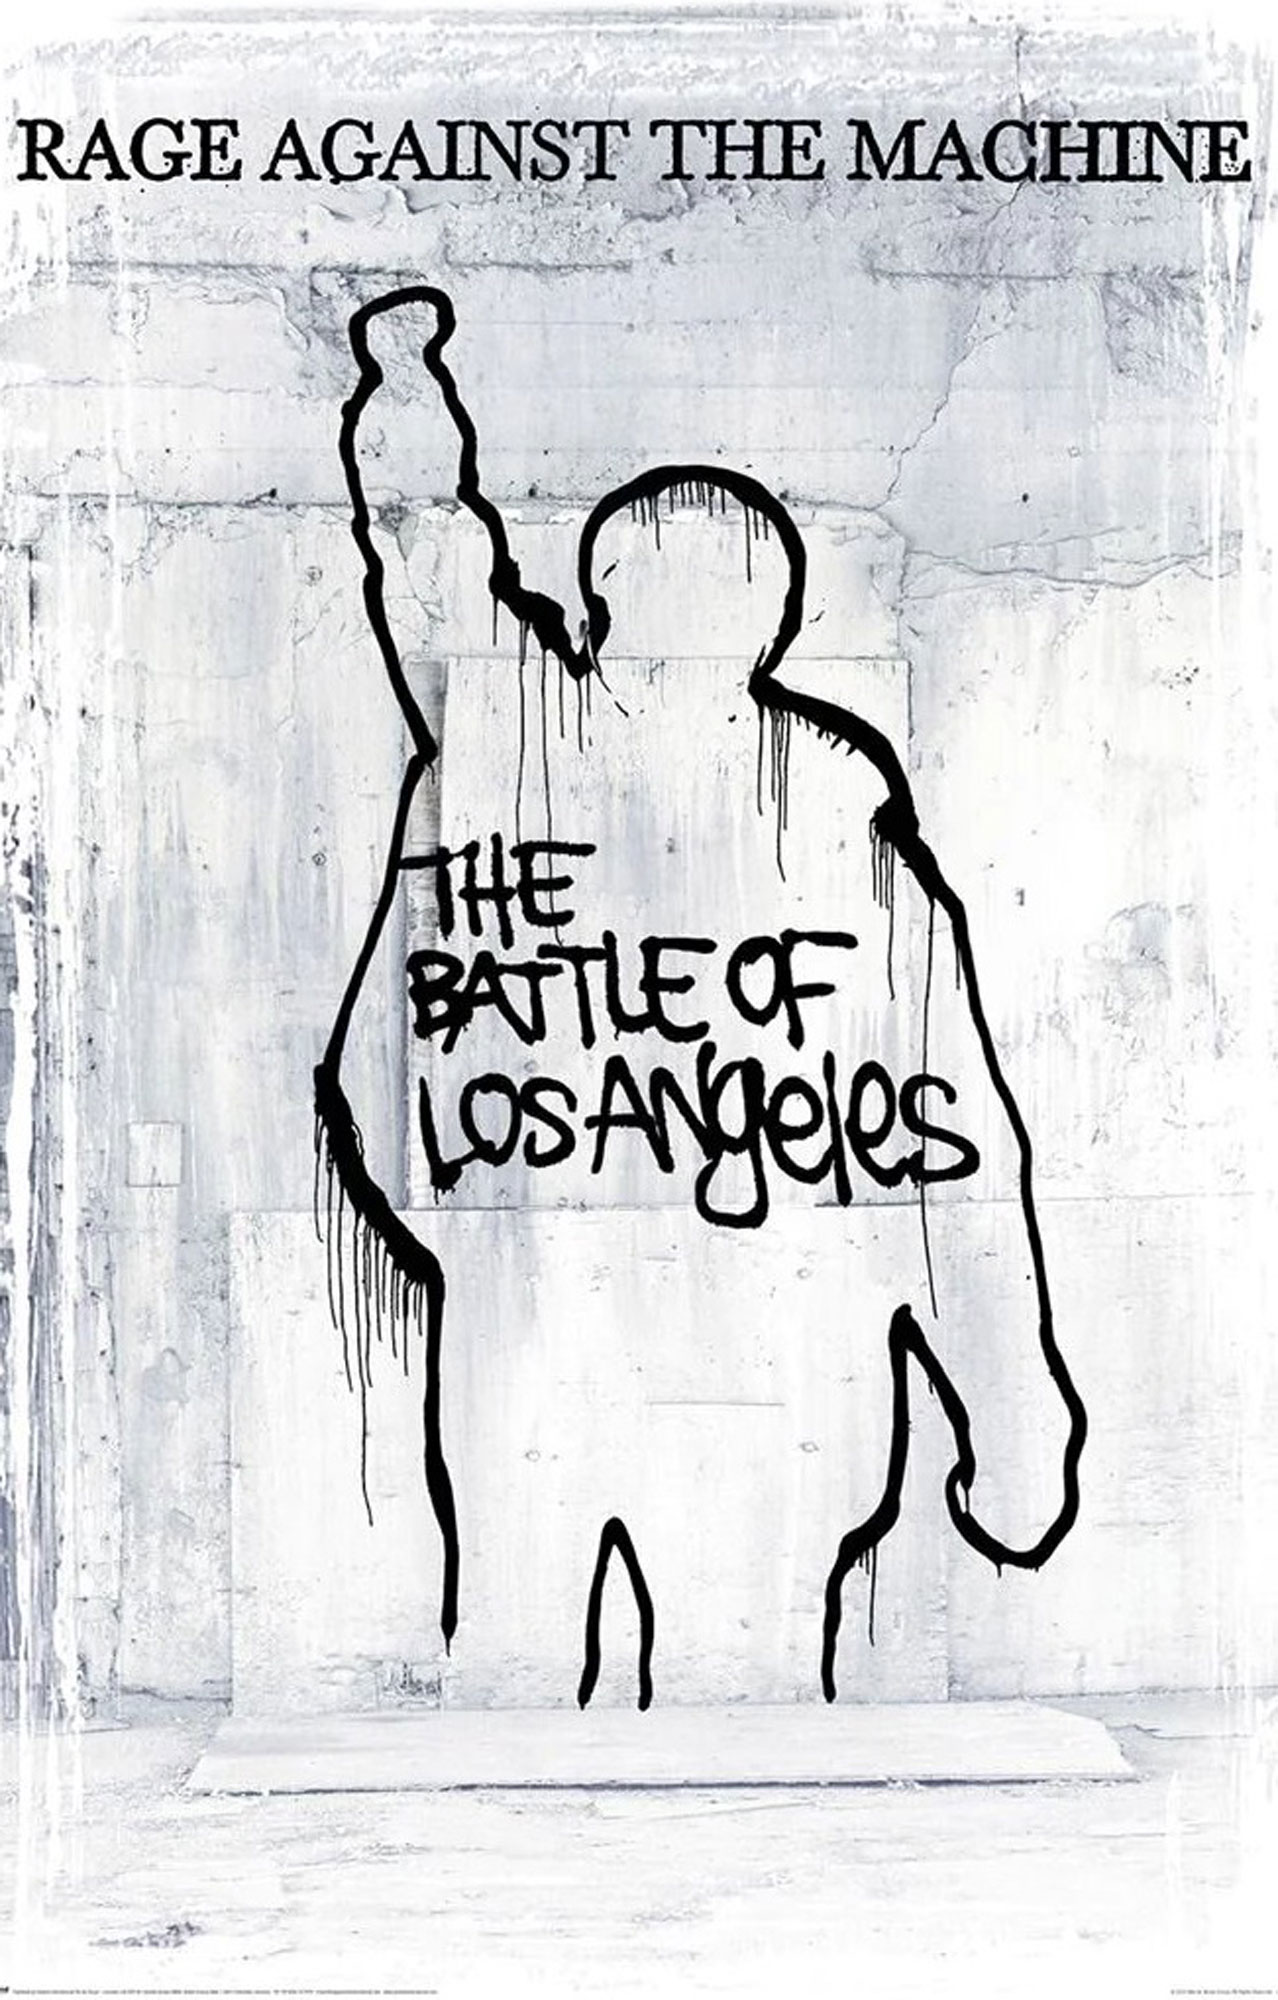 - for The Against Los Angeles The Machine Battle Rage